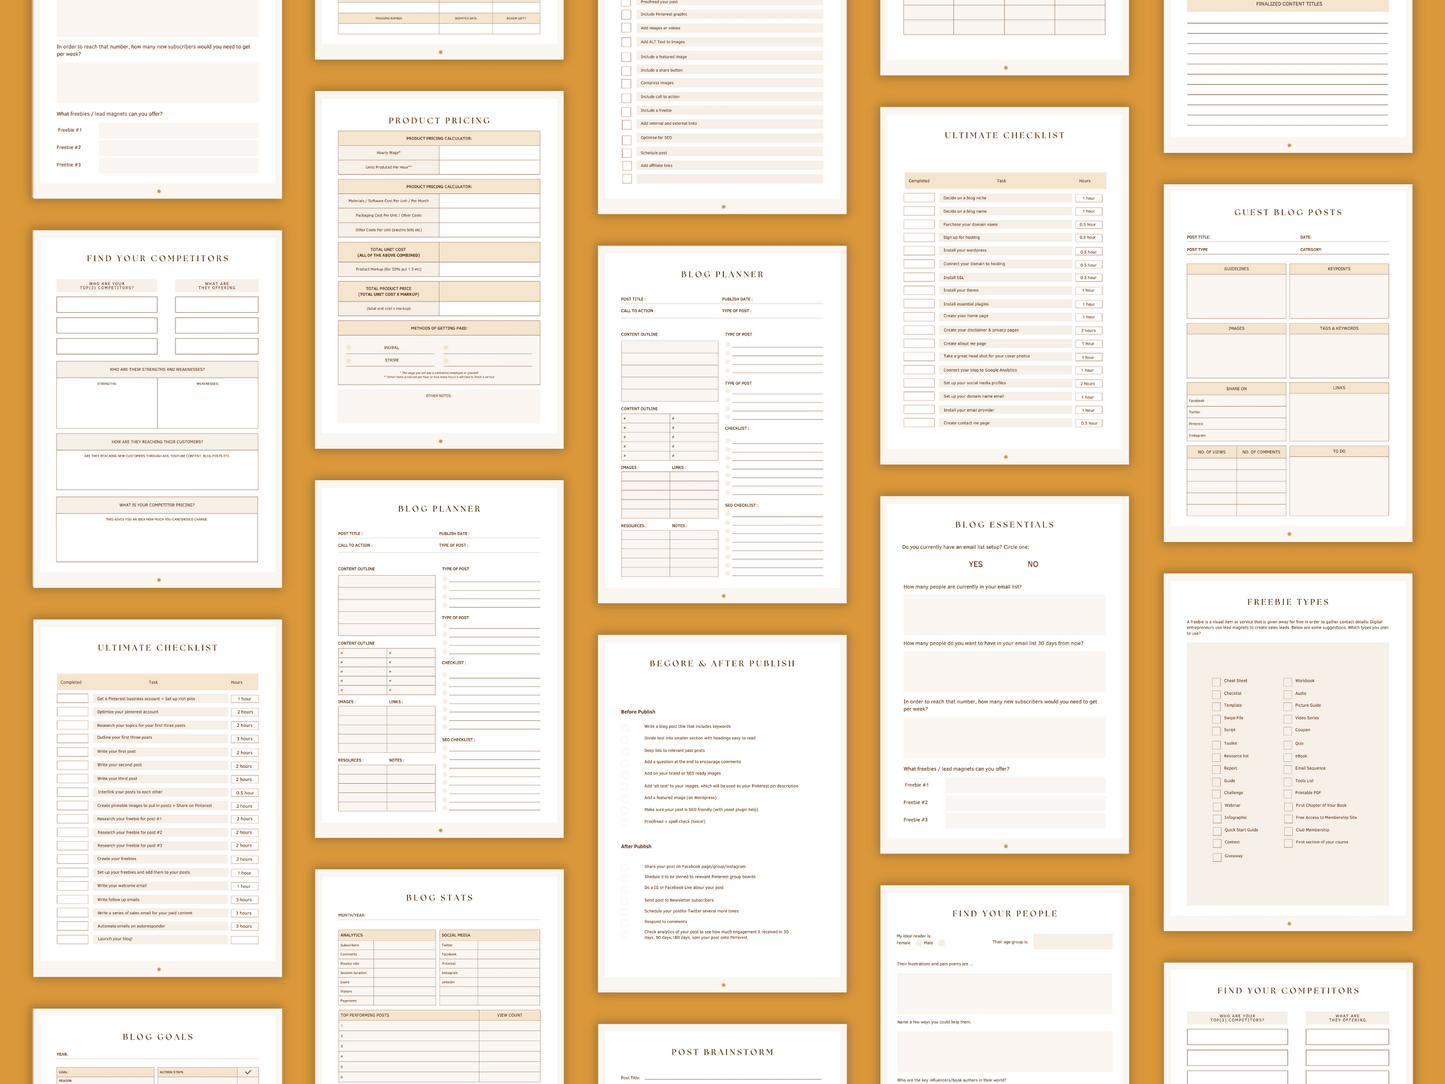 Aesthetic and boho blog content done-for-you planner templates which include e.g. blog essentials, ultimate checklist, blog planner, etc. for content creators and business owners. It's editable in Canva.